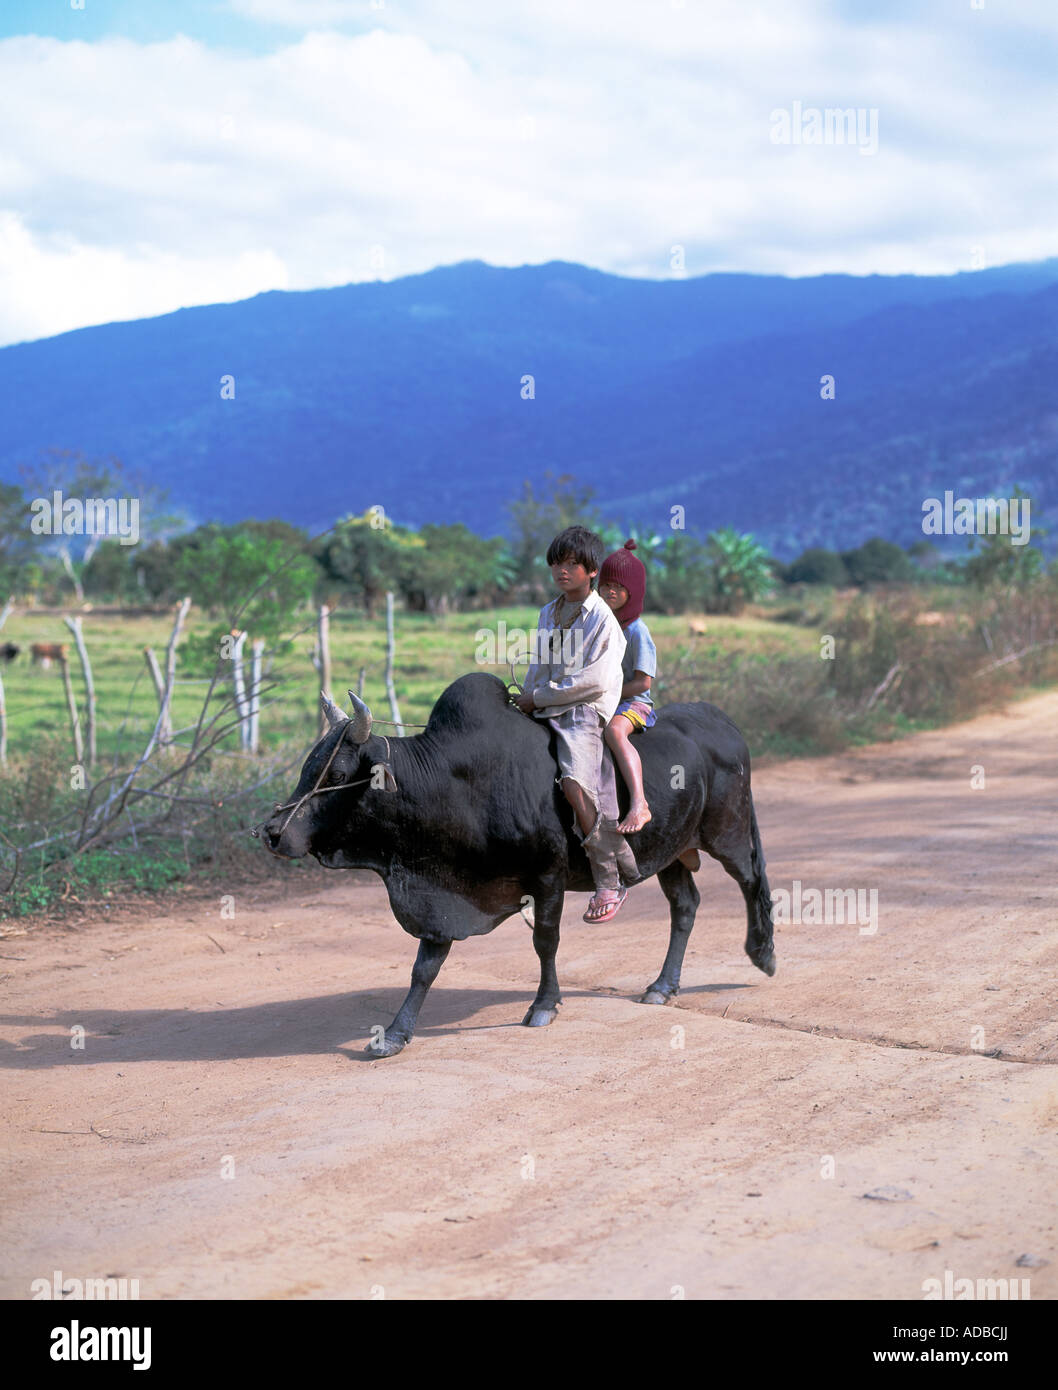 young kids riding along a dirt road on a cow/bullock along vietnamese landscape, Stock Photo